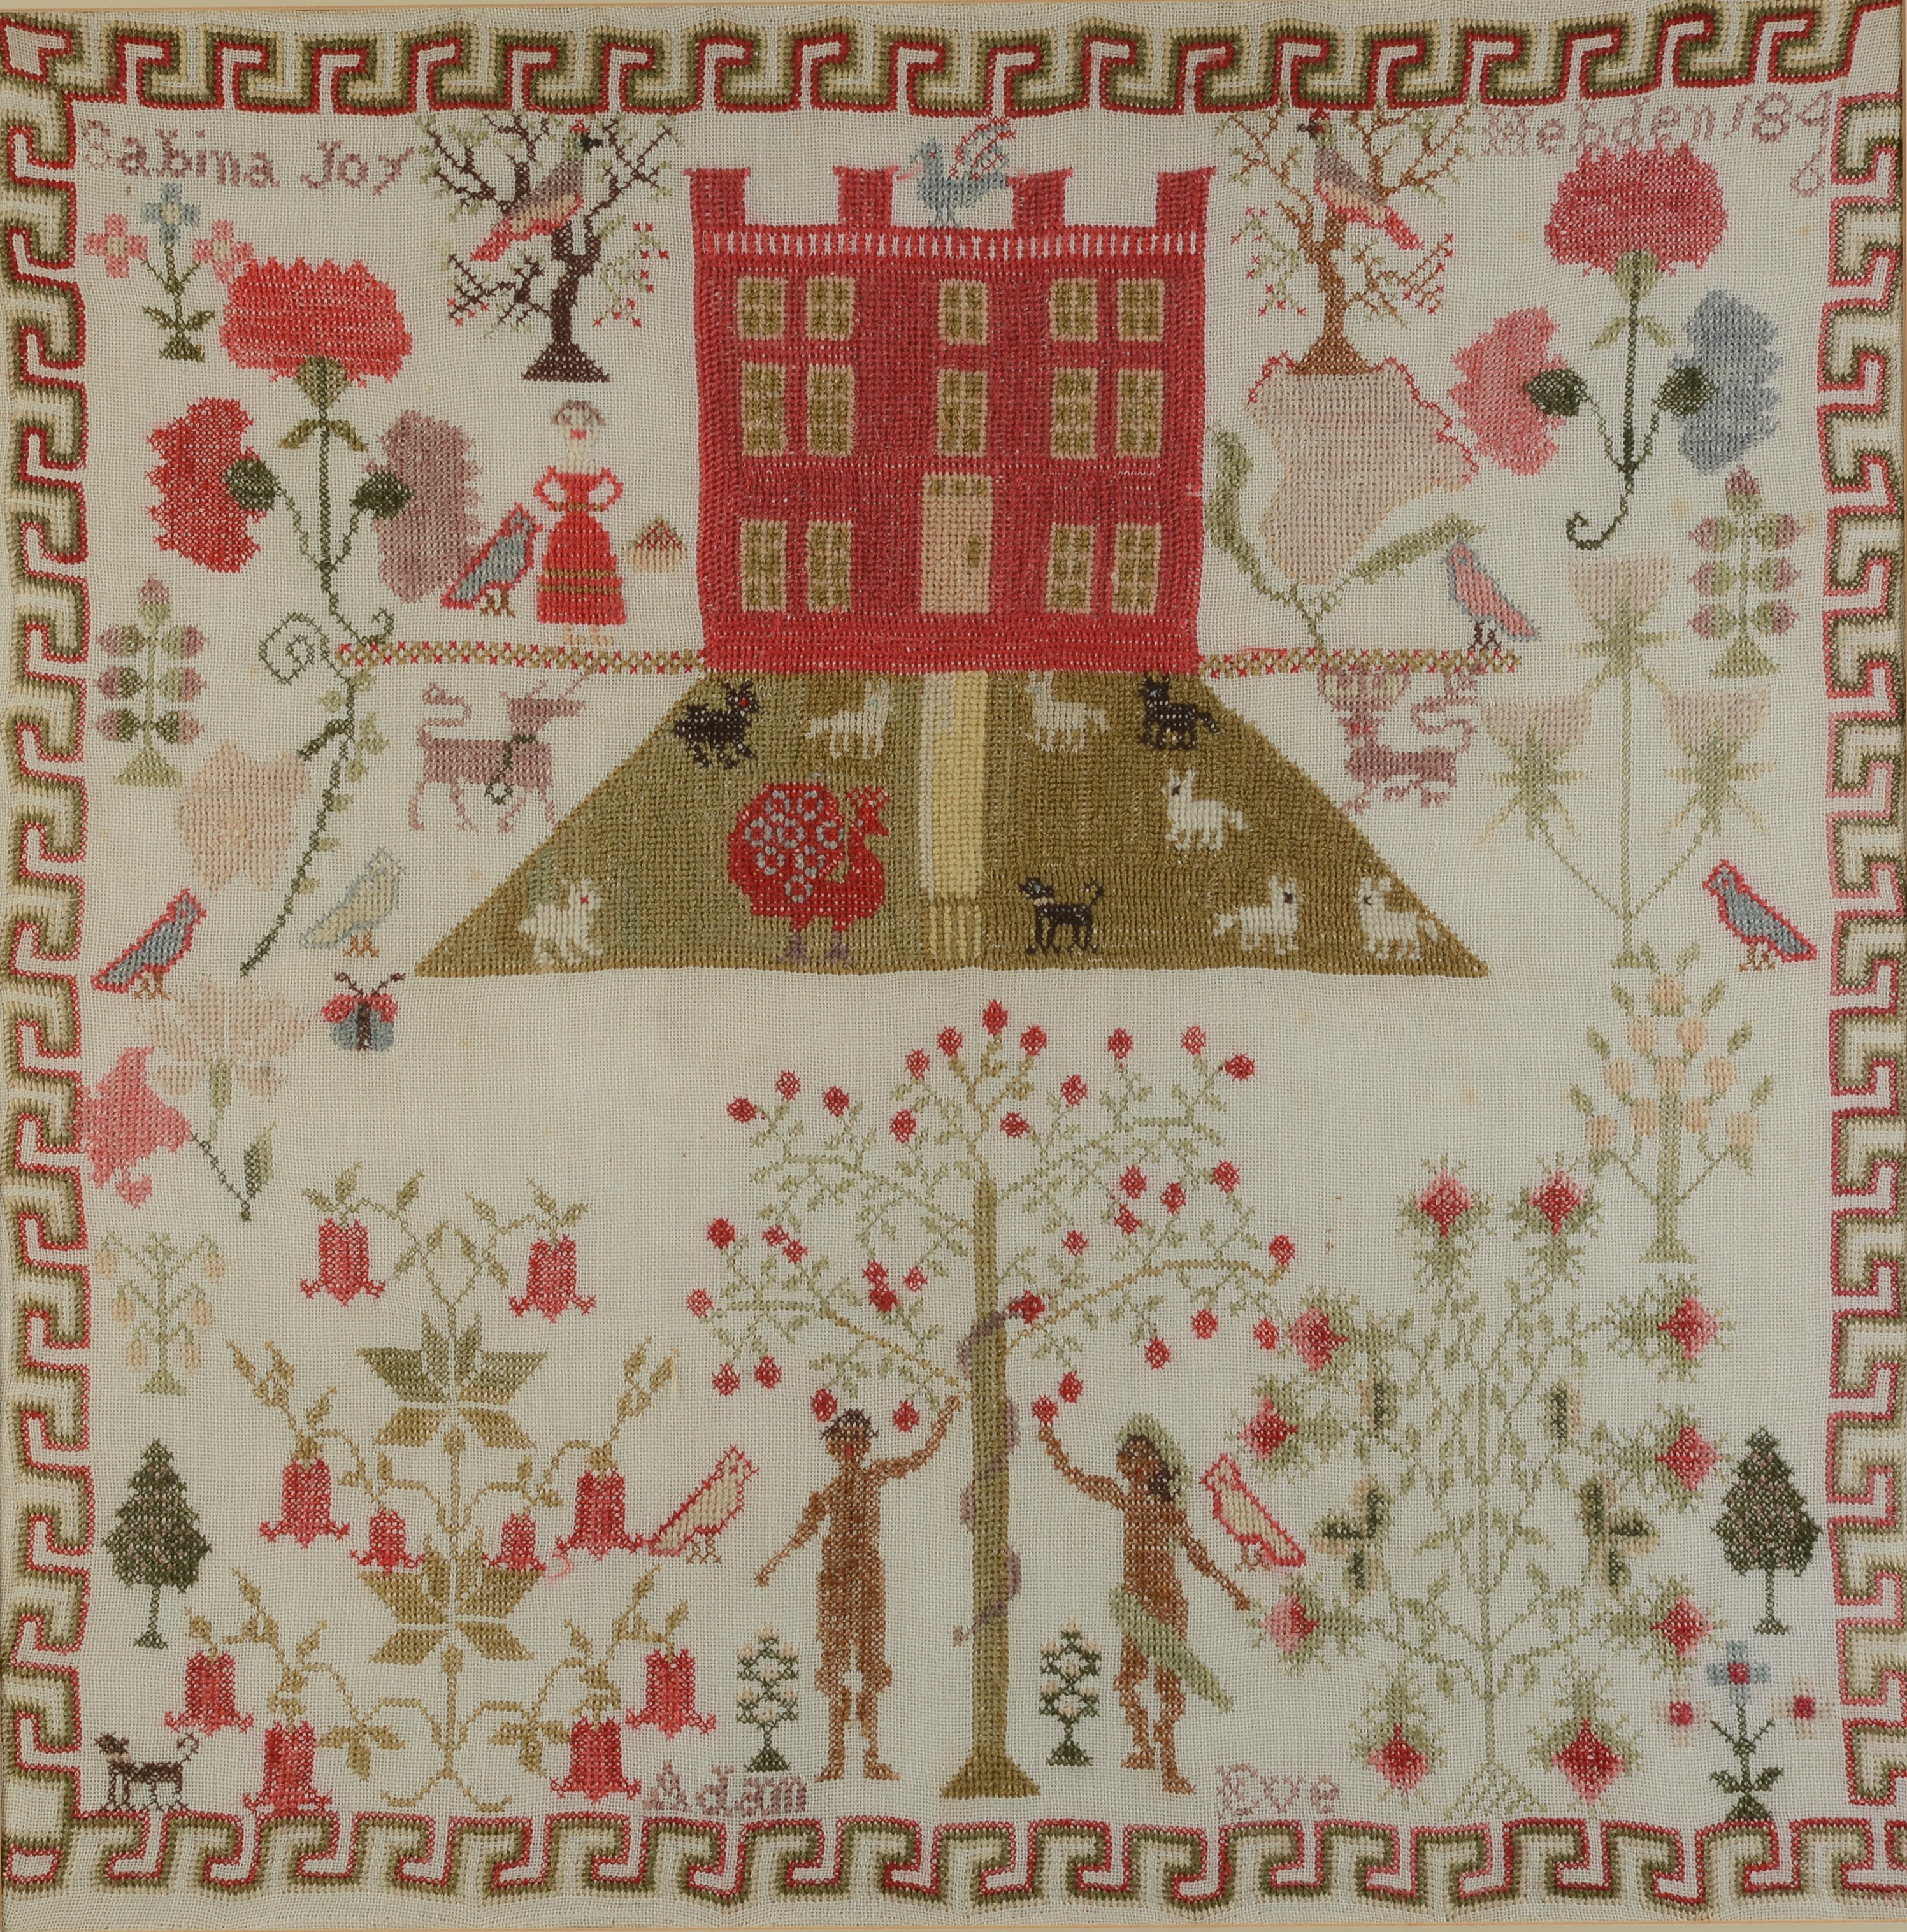 A 19th CENTURY ADAM AND EVE SAMPLER the work of Sabina Joy Hebden in 1846 worked in red,